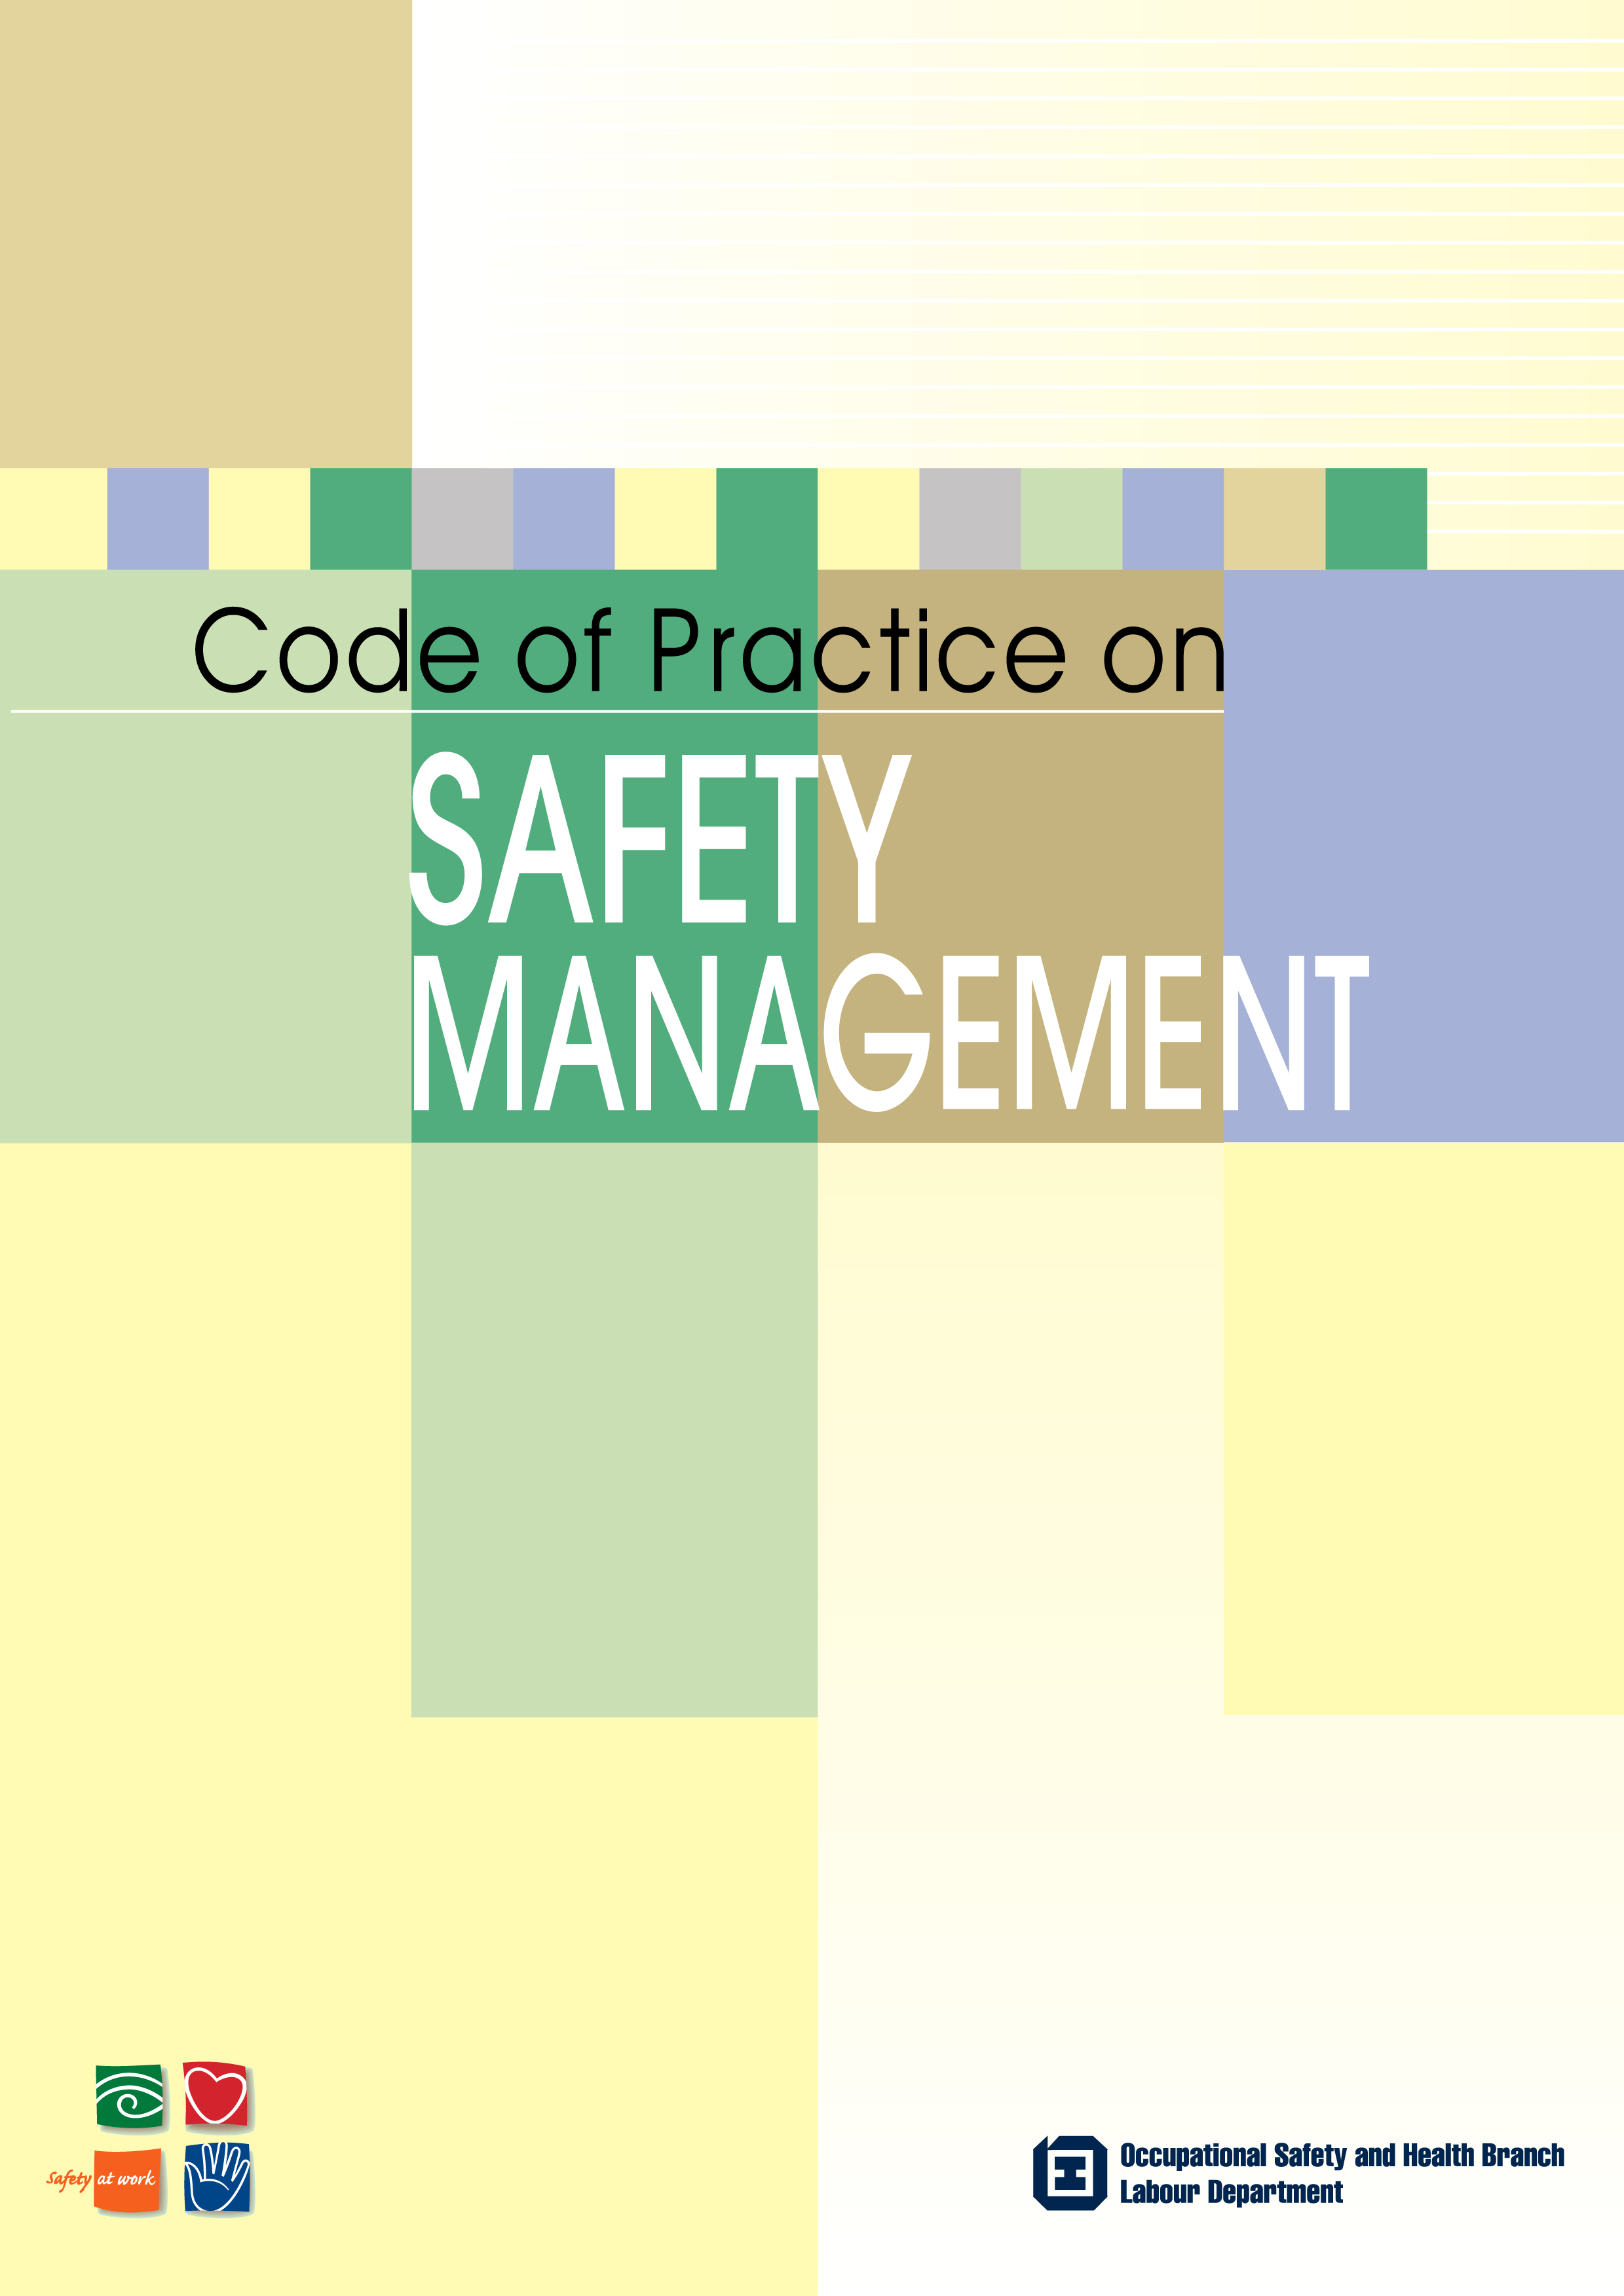 Code of Practice on Safety Management